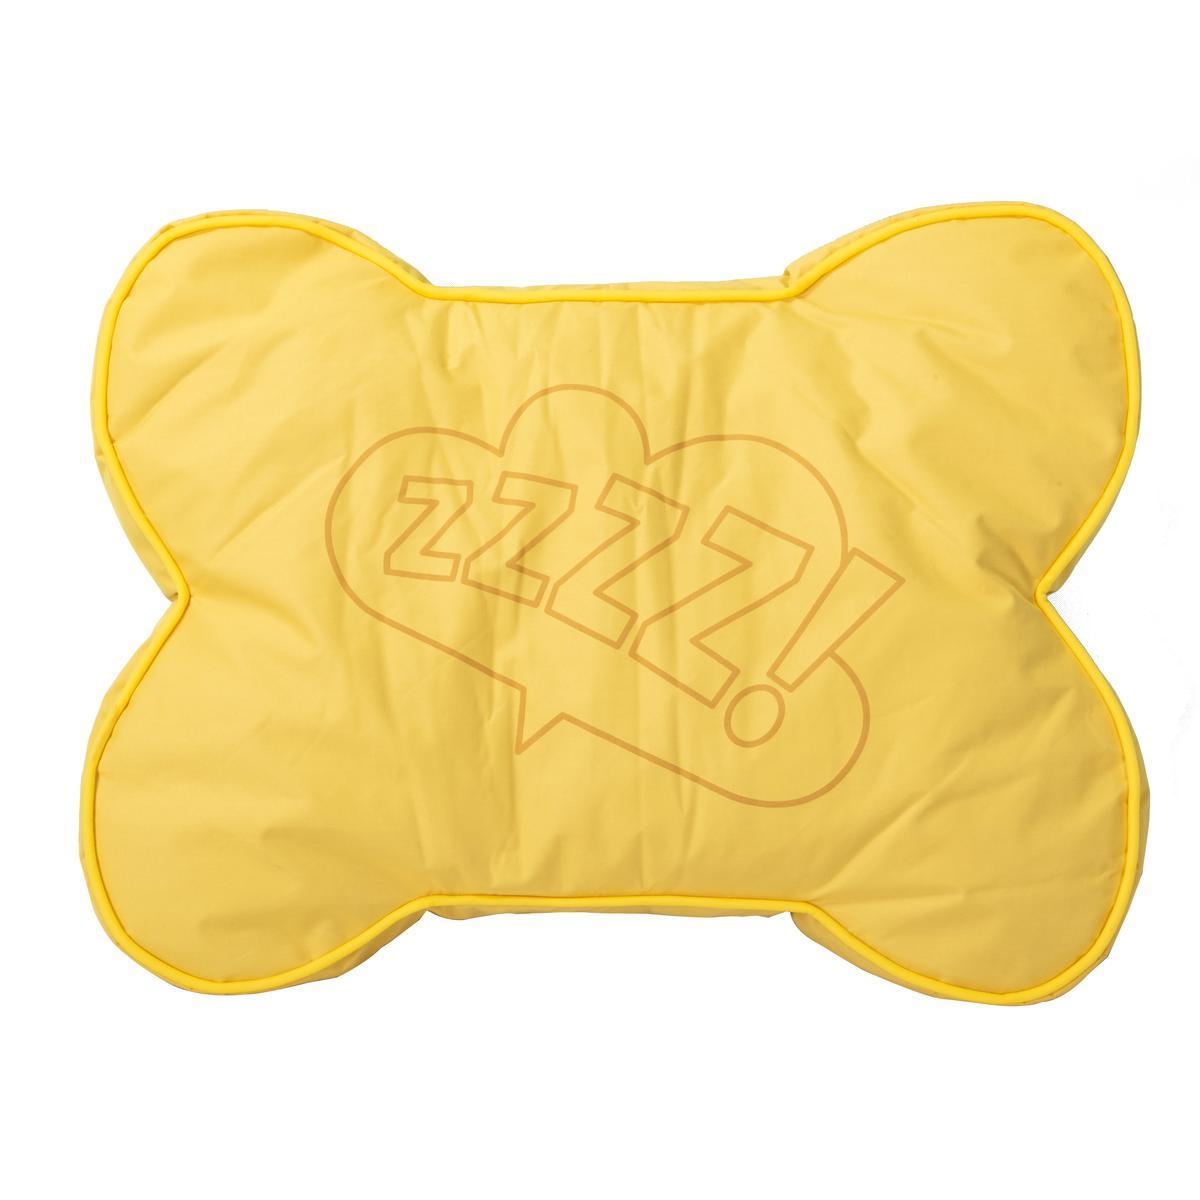 Coussin os - 90 x 70 x H 10 cm - Jaune moutarde